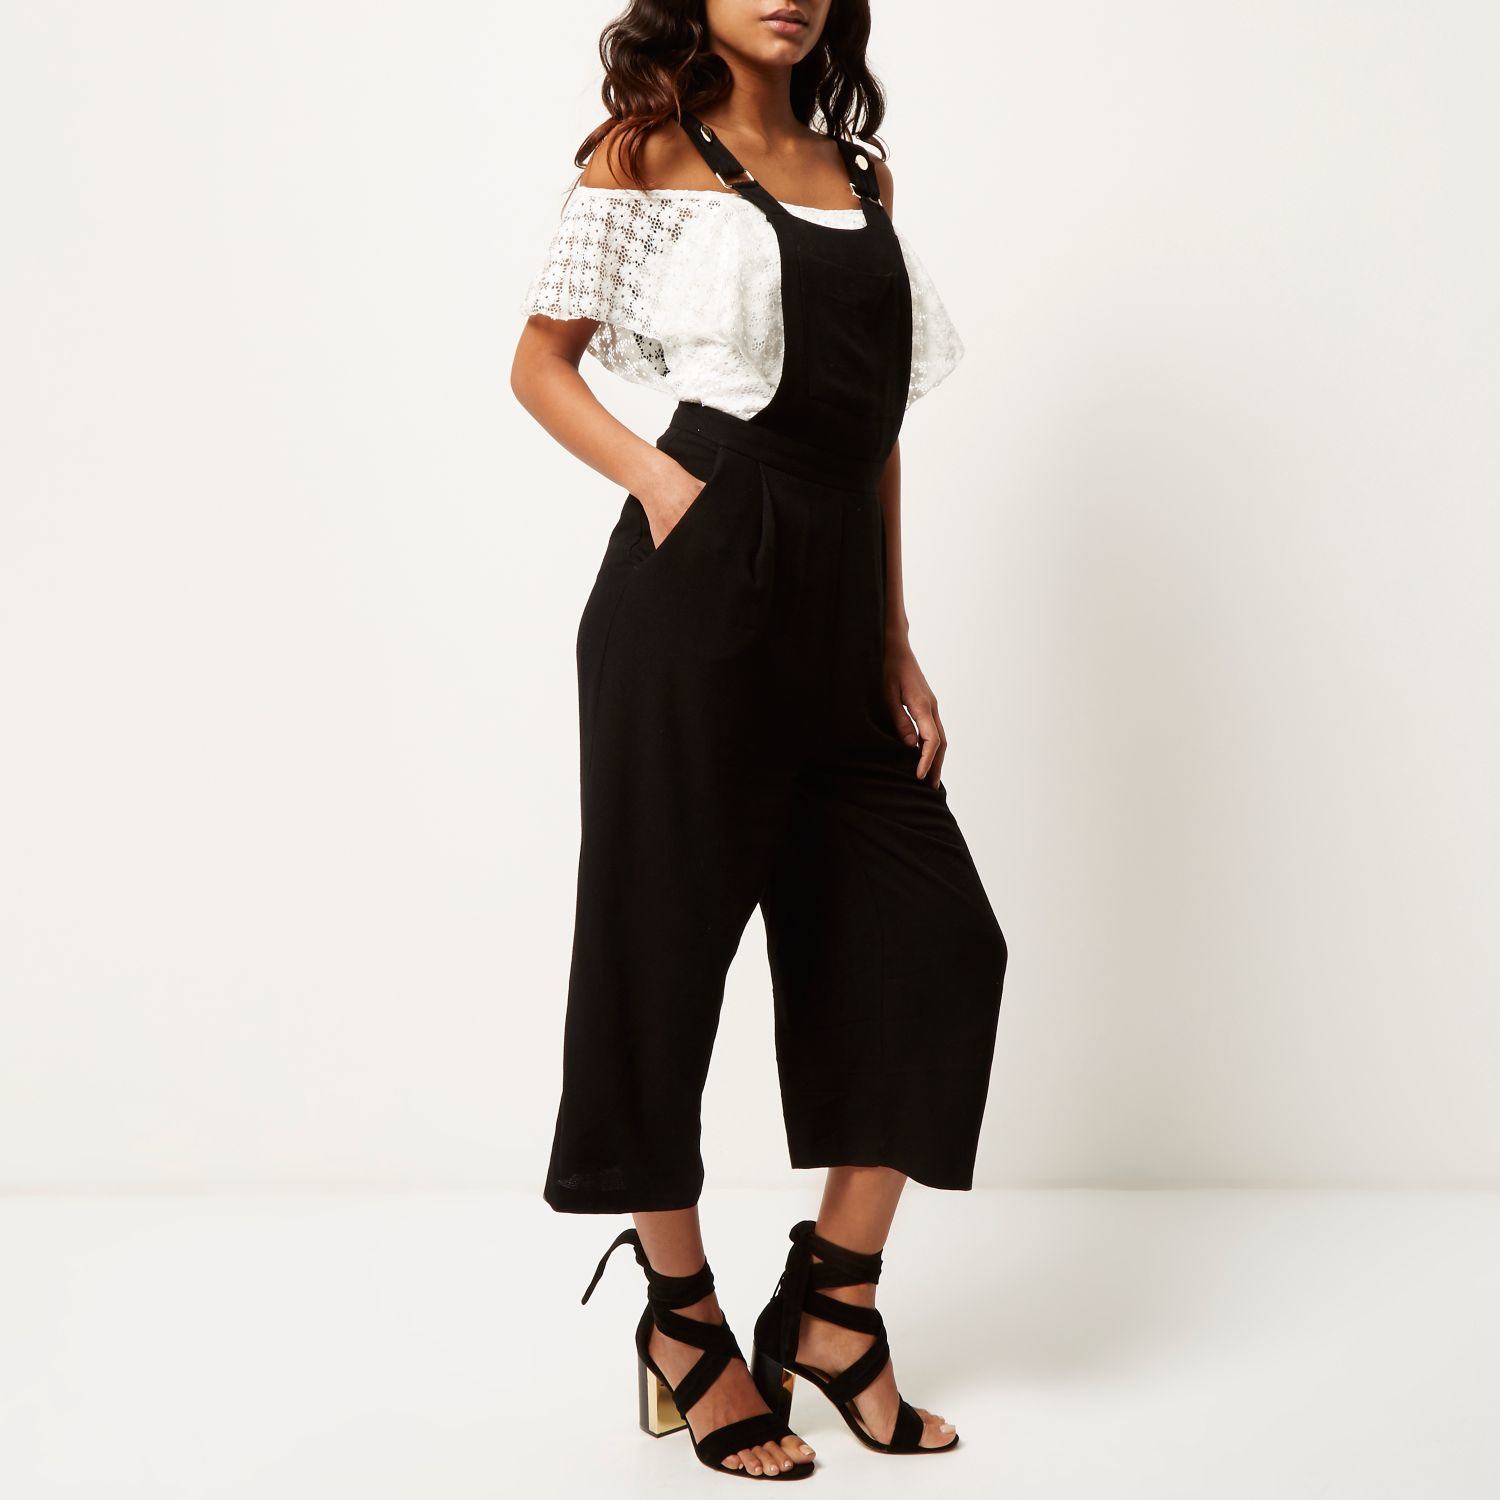 Lyst - River Island Black Textured Culotte Dungarees in Black